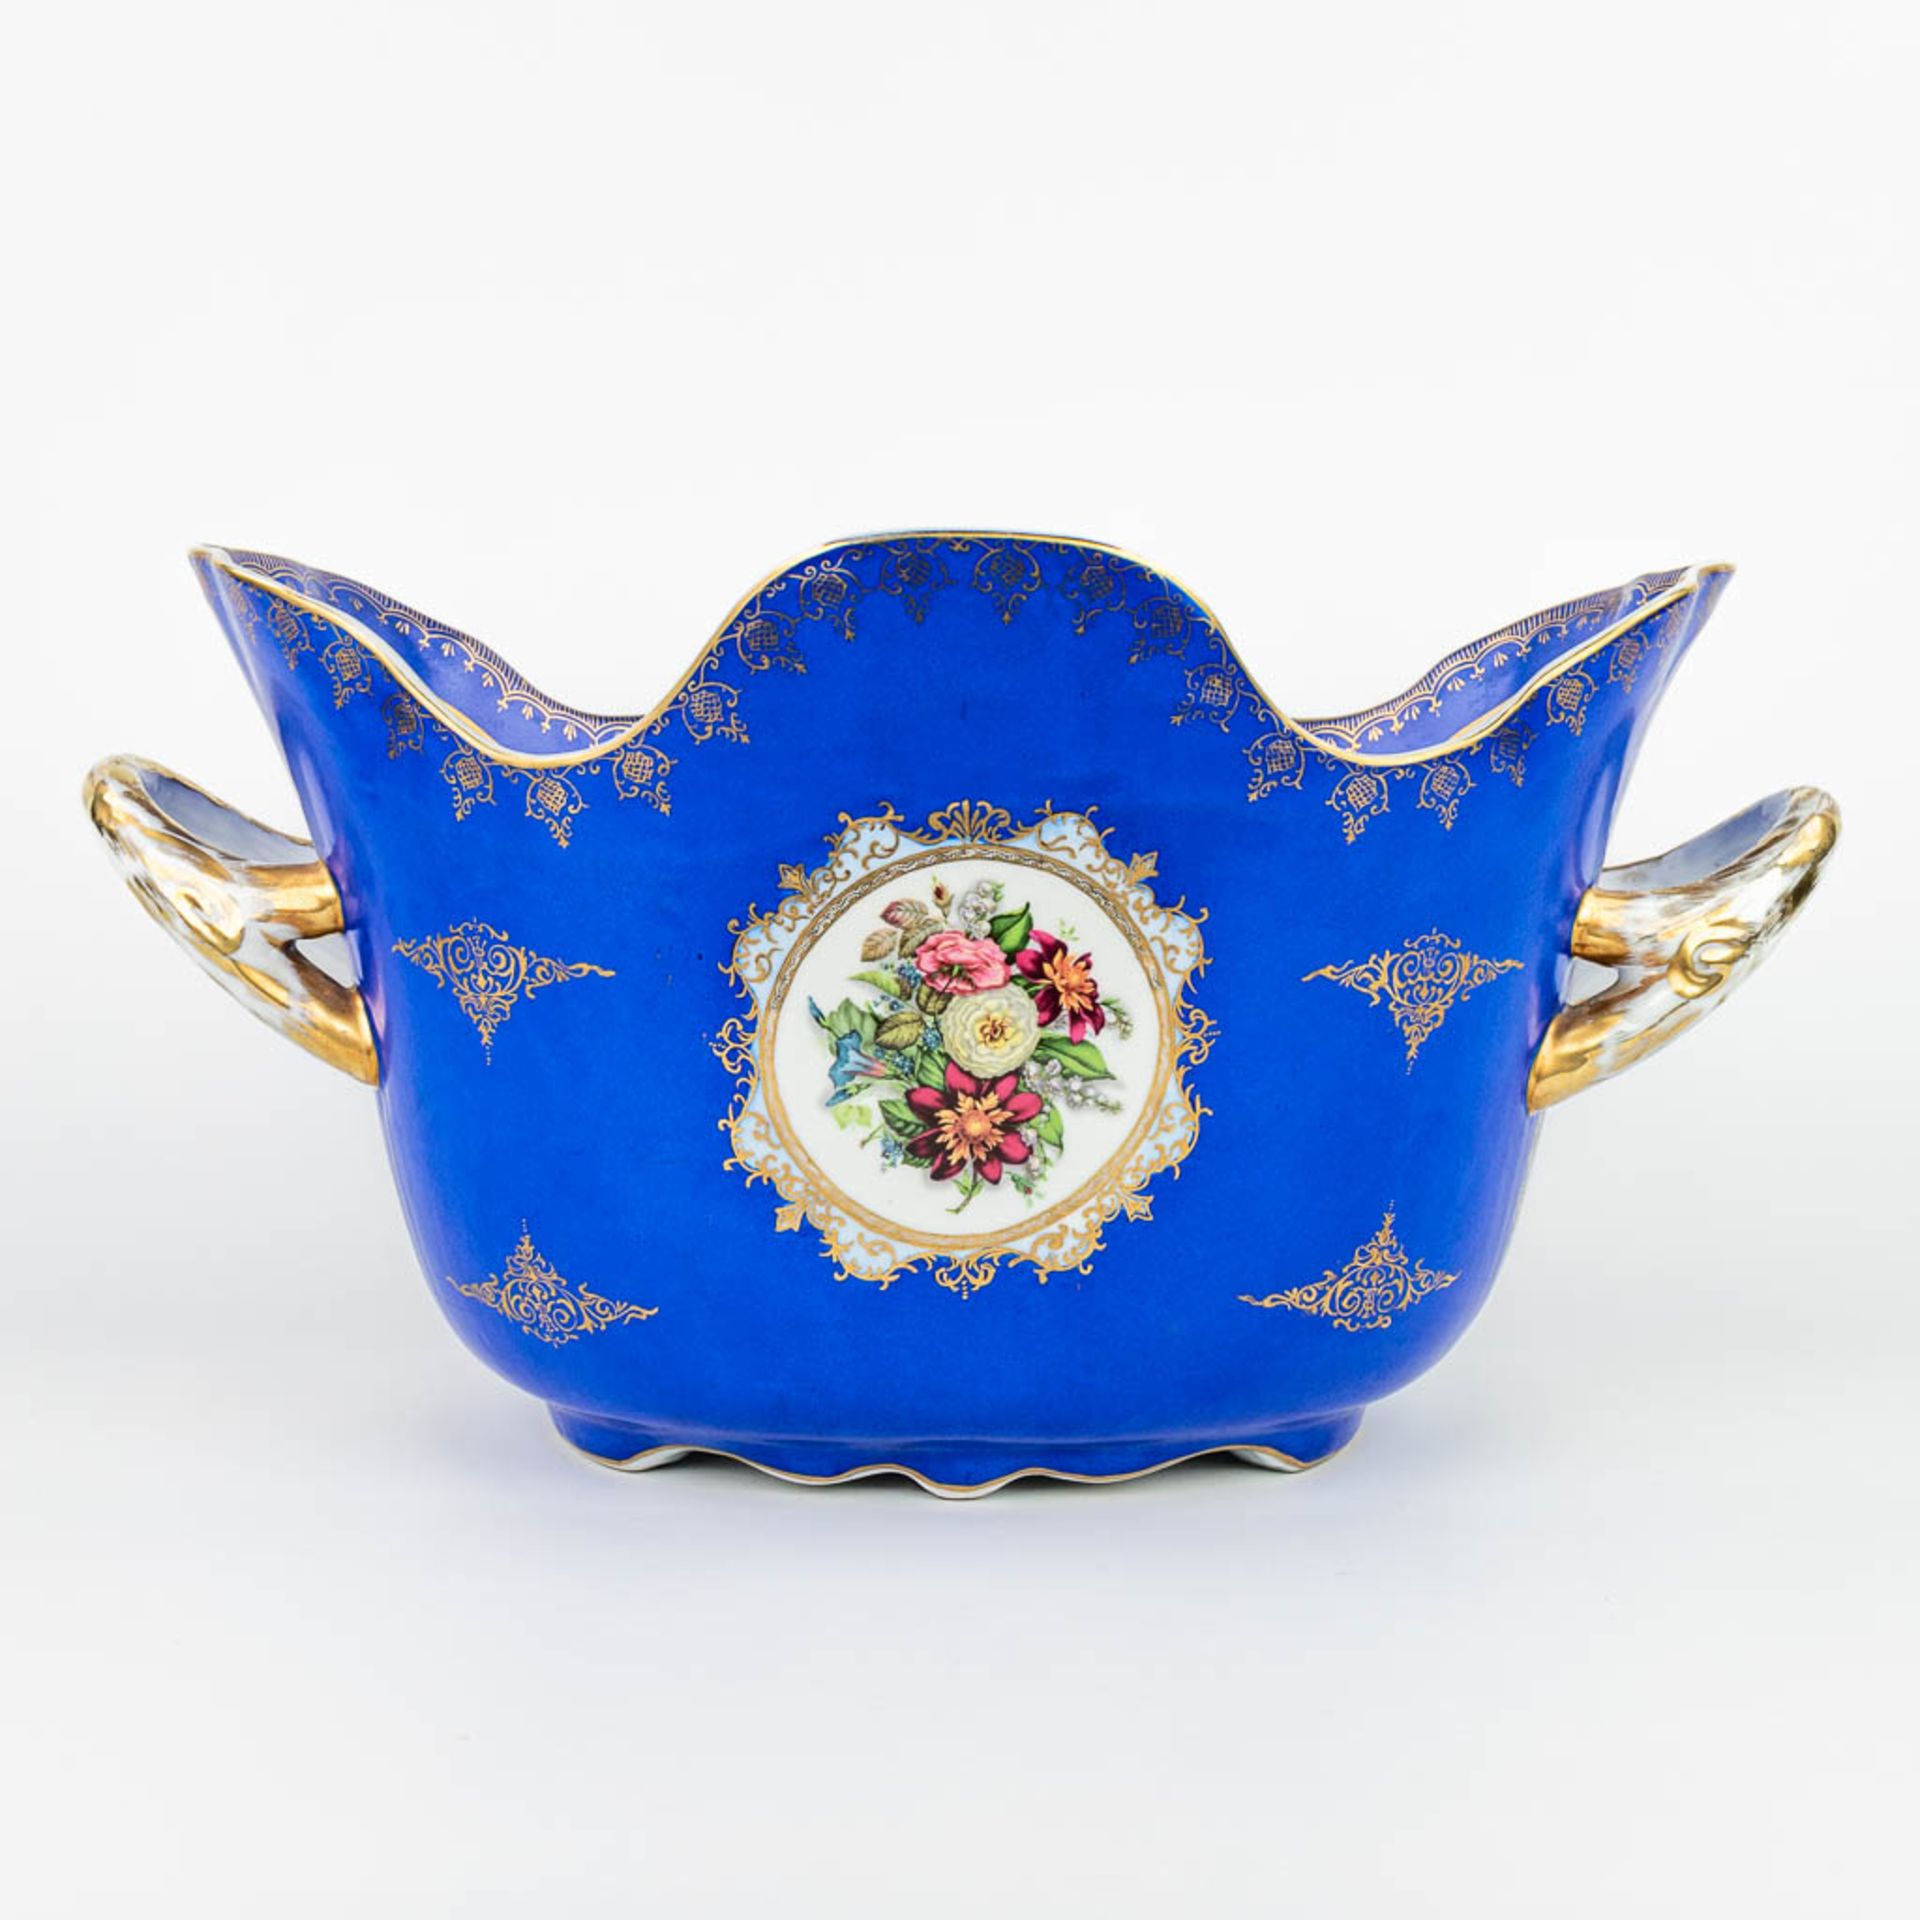 A large wine cooler made of porcelain with flower decor and marked with the Meissener logo. (H:28cm) - Image 7 of 13